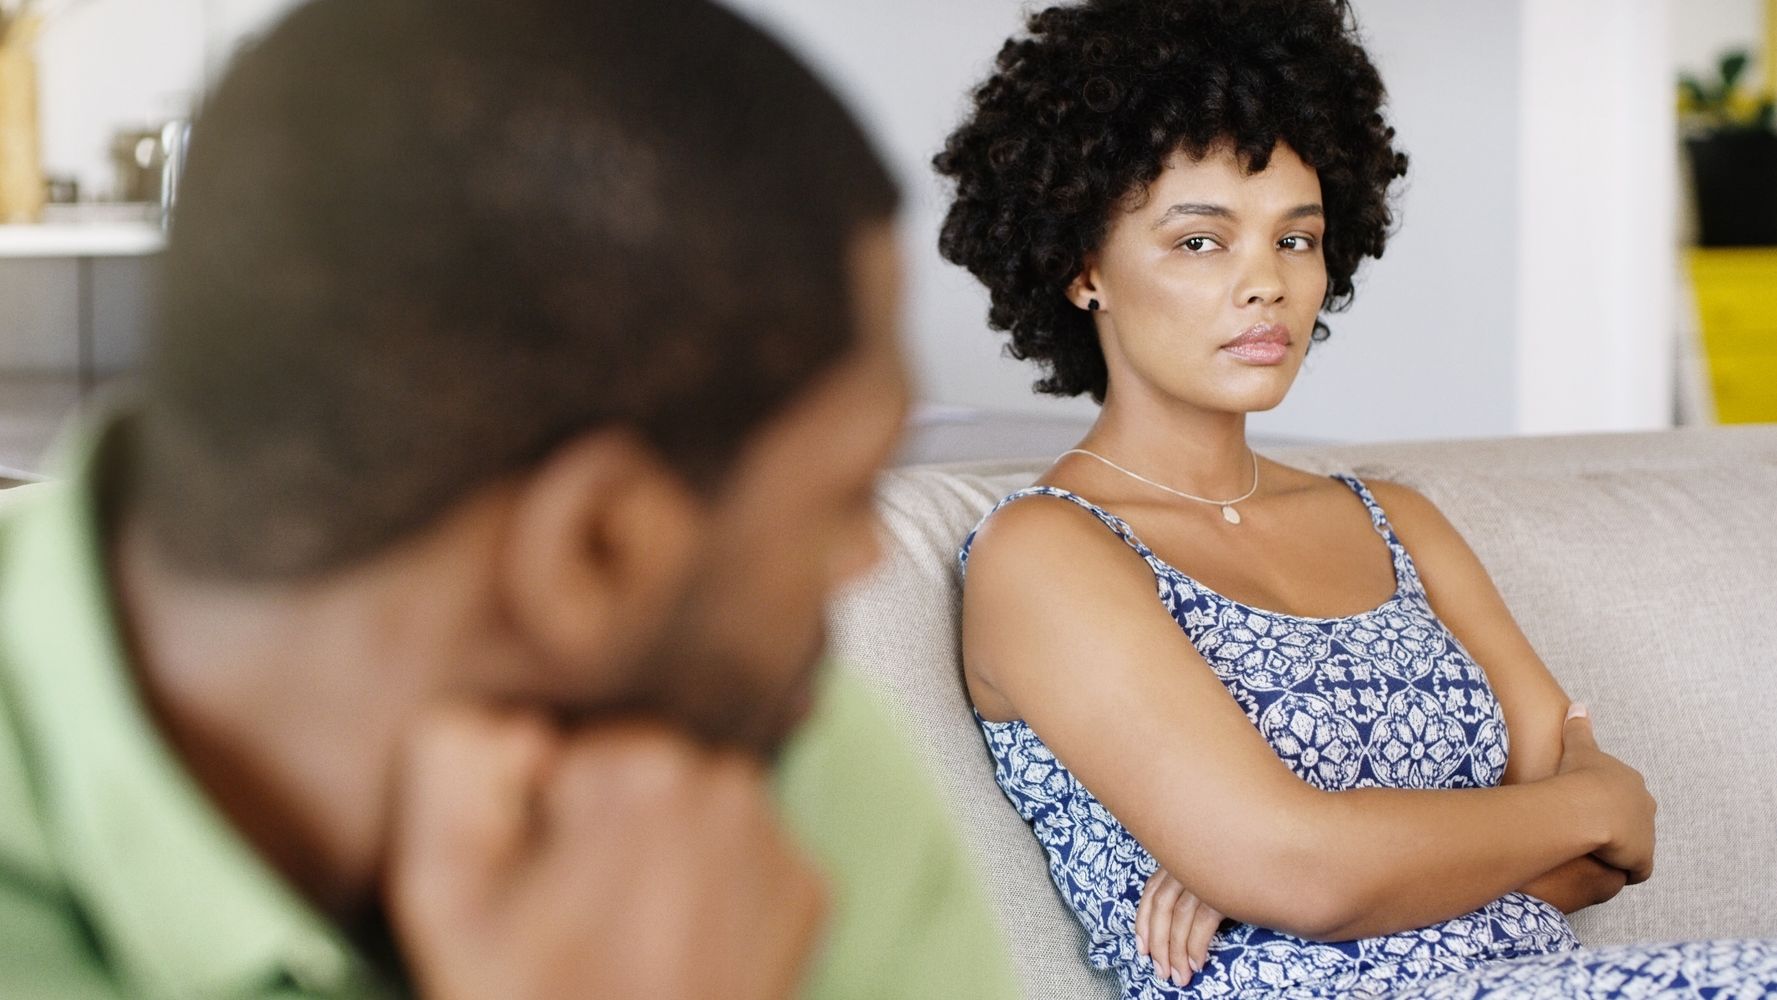 What Therapists Think Of Staying In A 'So-So' Marriage